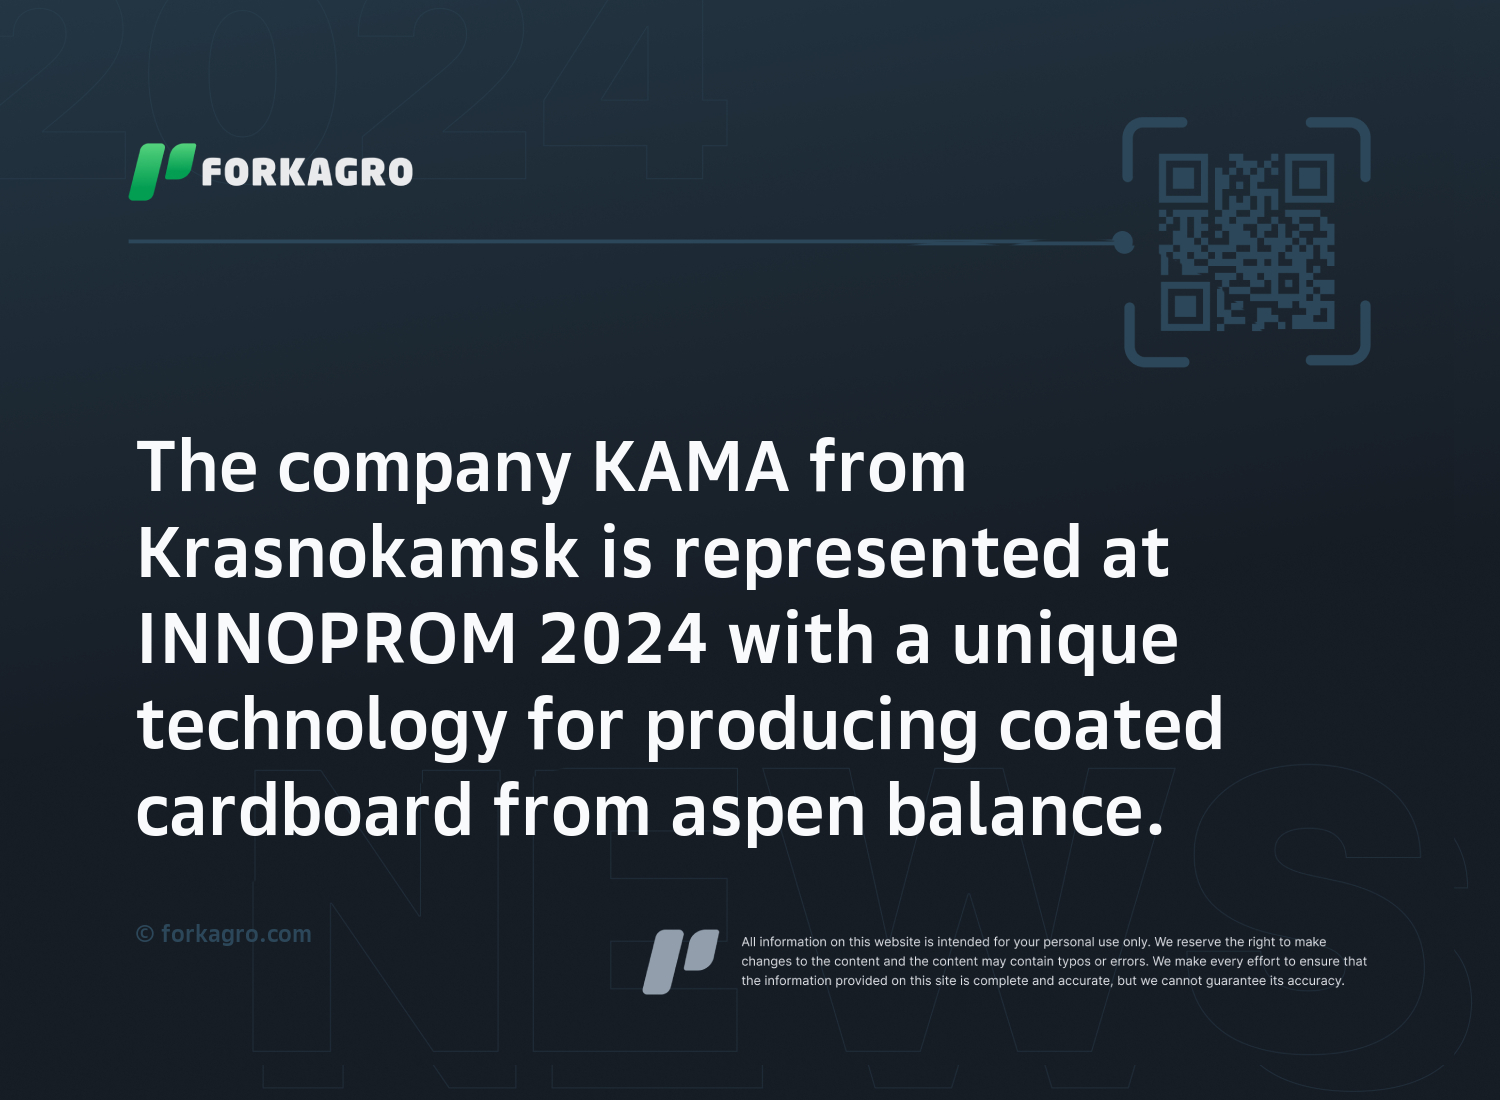 The company KAMA from Krasnokamsk is represented at INNOPROM 2024 with a unique technology for producing coated cardboard from aspen balance.